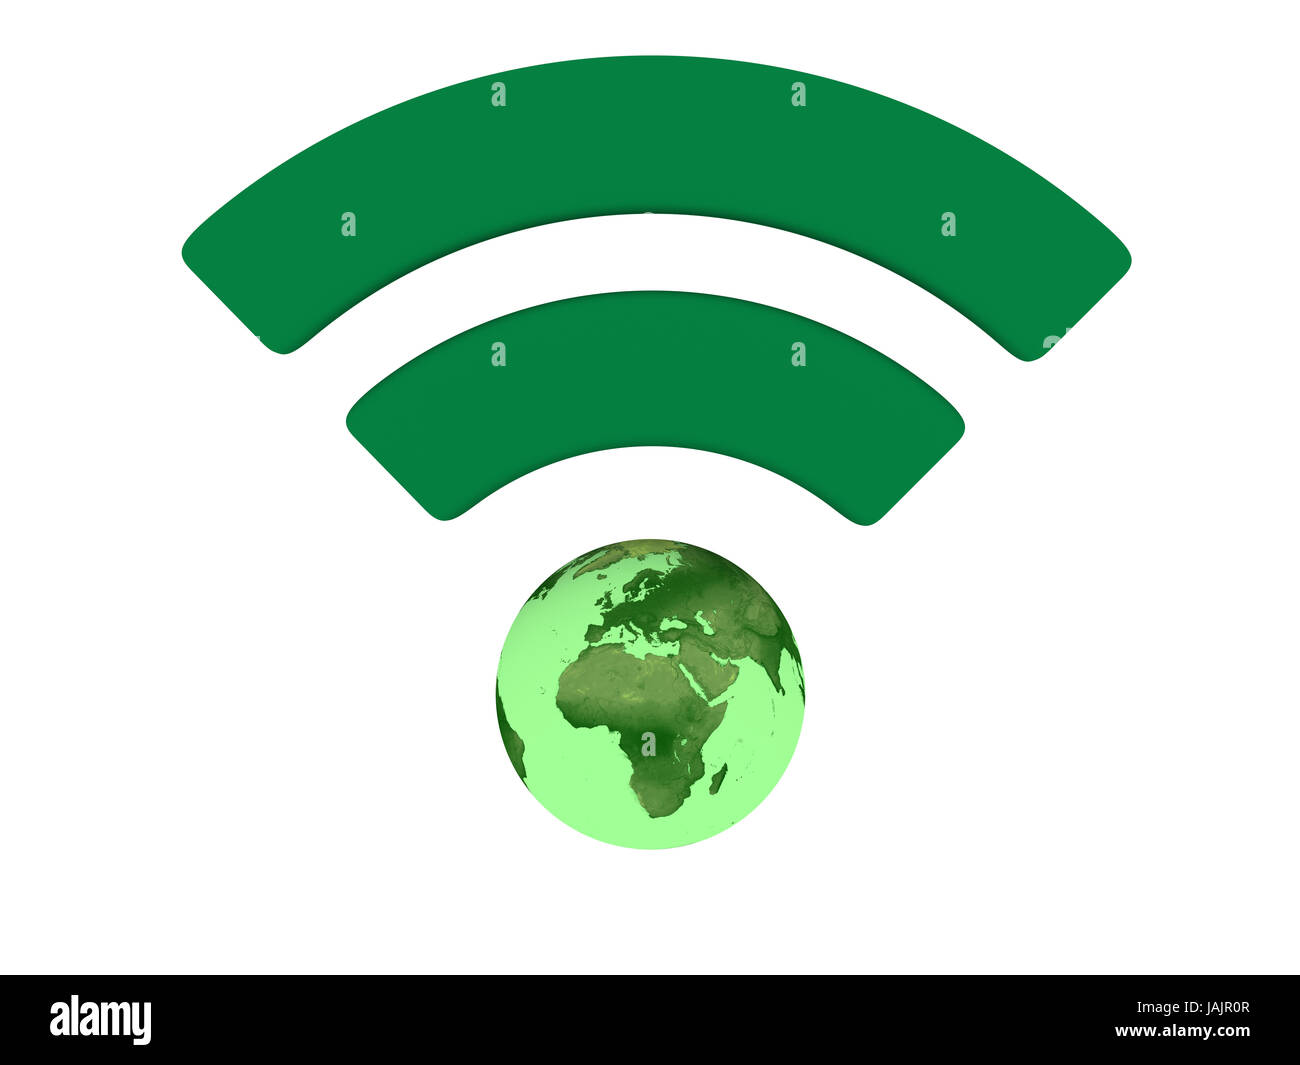 Green WiFi symbol with planet Earth isolated on white background. Elements of this image furnished by NASA. Stock Photo